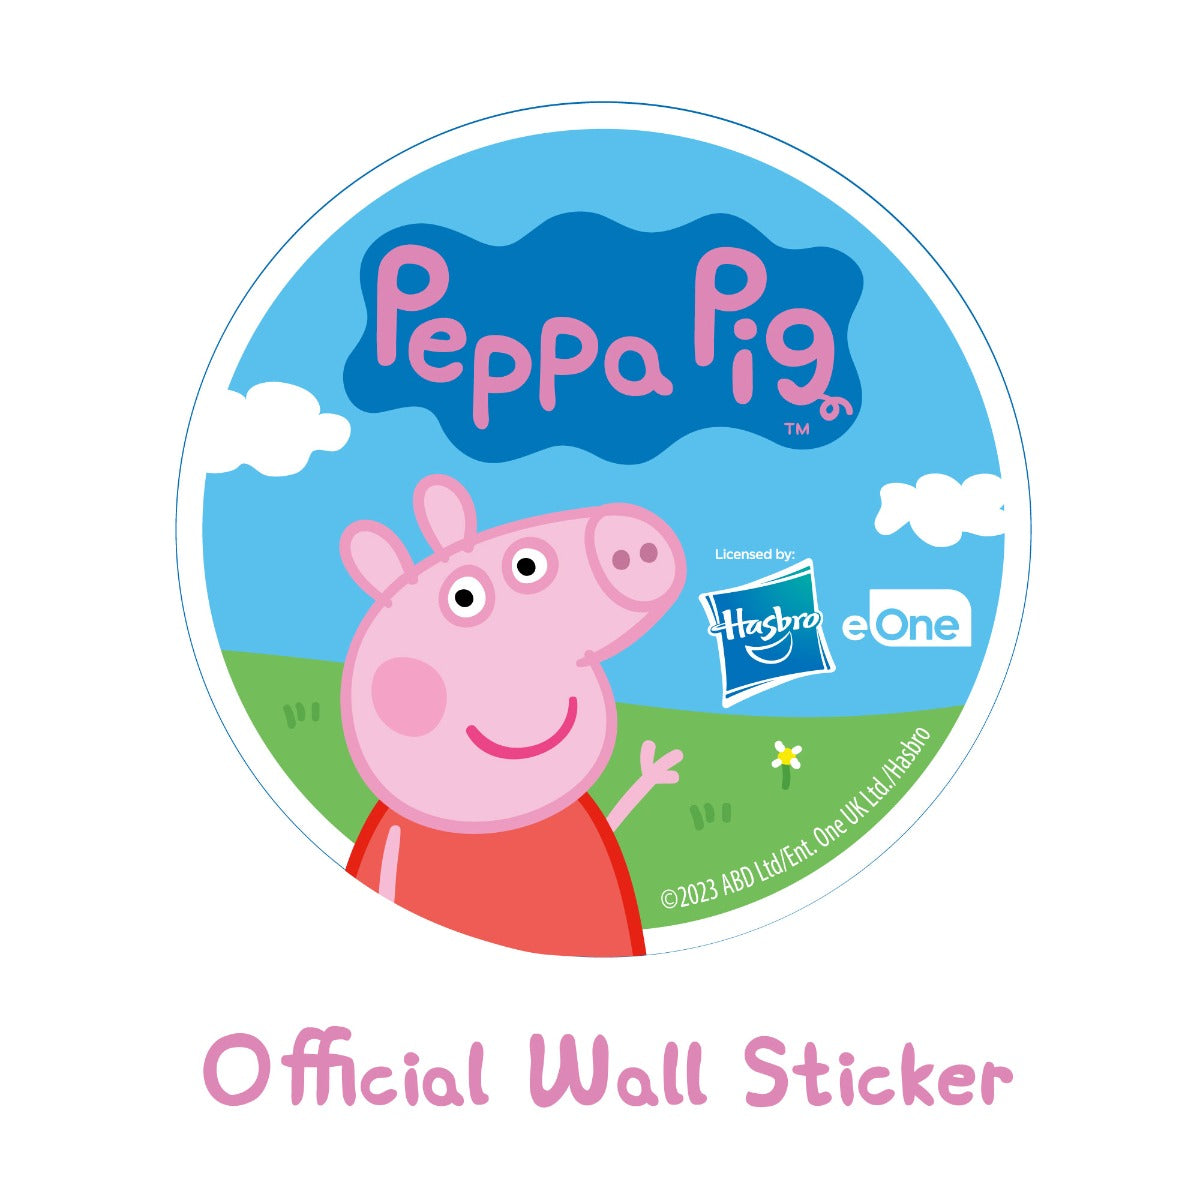 Peppa Pig Wall Sticker - Peppa Pig and Family Jumping in Muddy Puddles